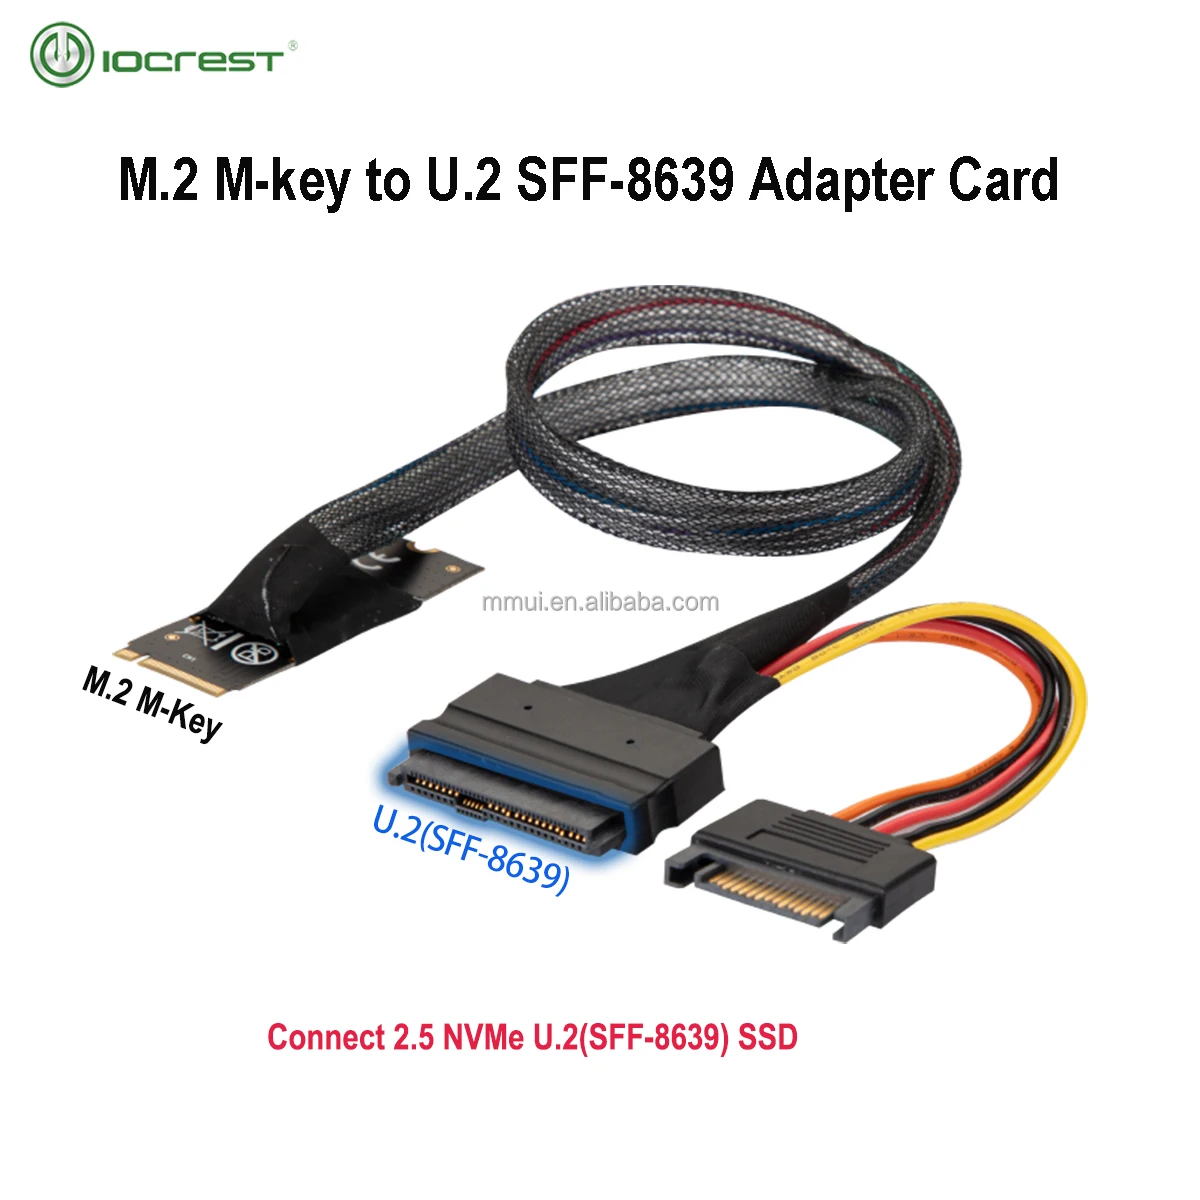 M.2 Connecting Cable Simple U.2 to M.2 Cable Convenient M.2 Cable Practical Reliable No Power Supply SF-8639 Cable for Laptop for Desktop 